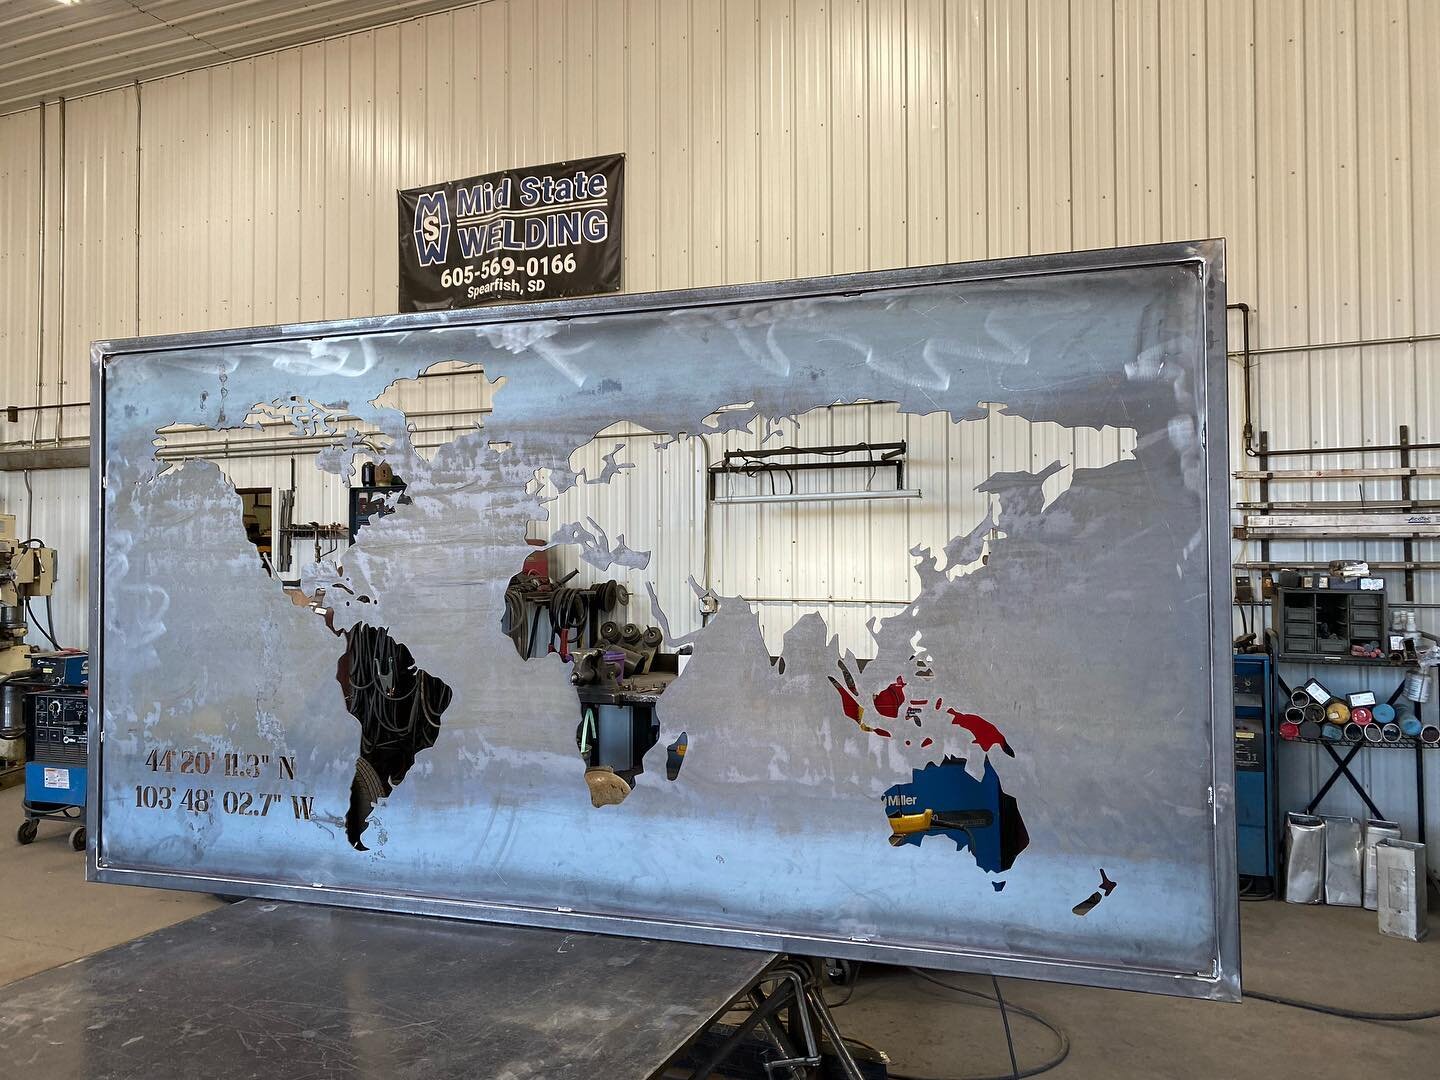 The Map of the world we framed out for Cappie @pangeadesigngroup and to see the map installed in the home is awesome! How cool would it be to have something like this in your home?? #midstatewelding #mapoftheworld #myspearfish #pangeadesigns #customf